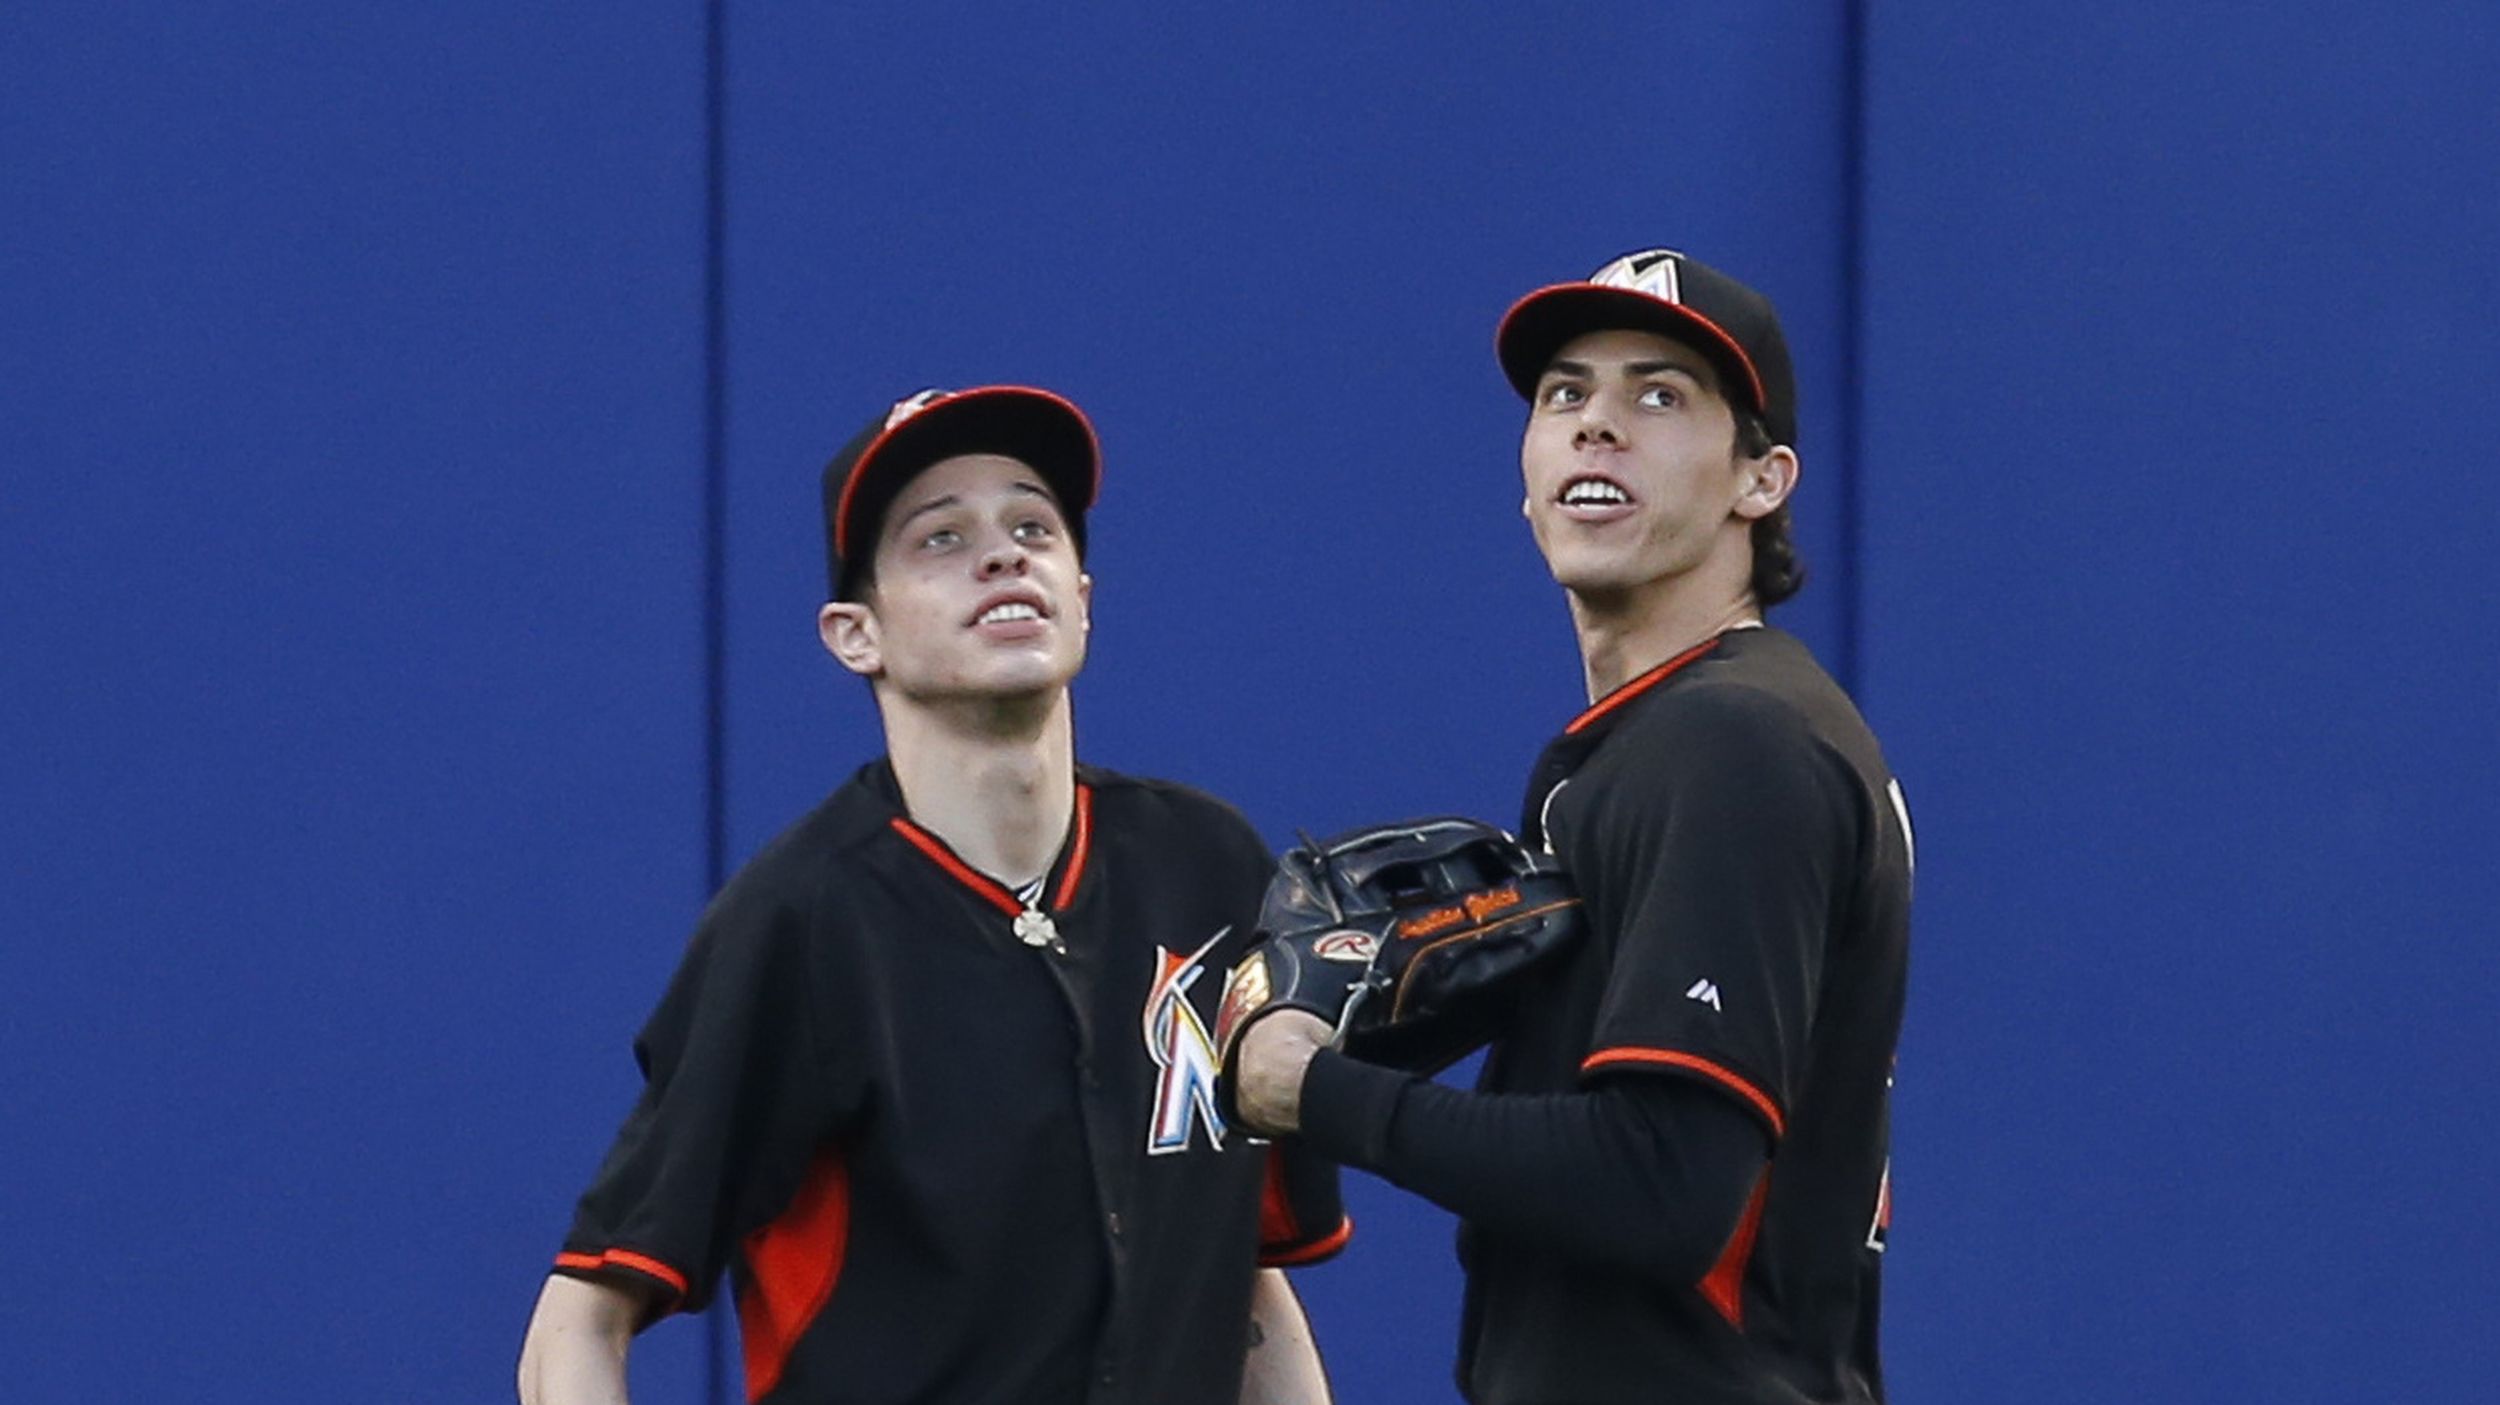 MLB notes: Marlins surprise Christian Yelich with lookalike from 'SNL